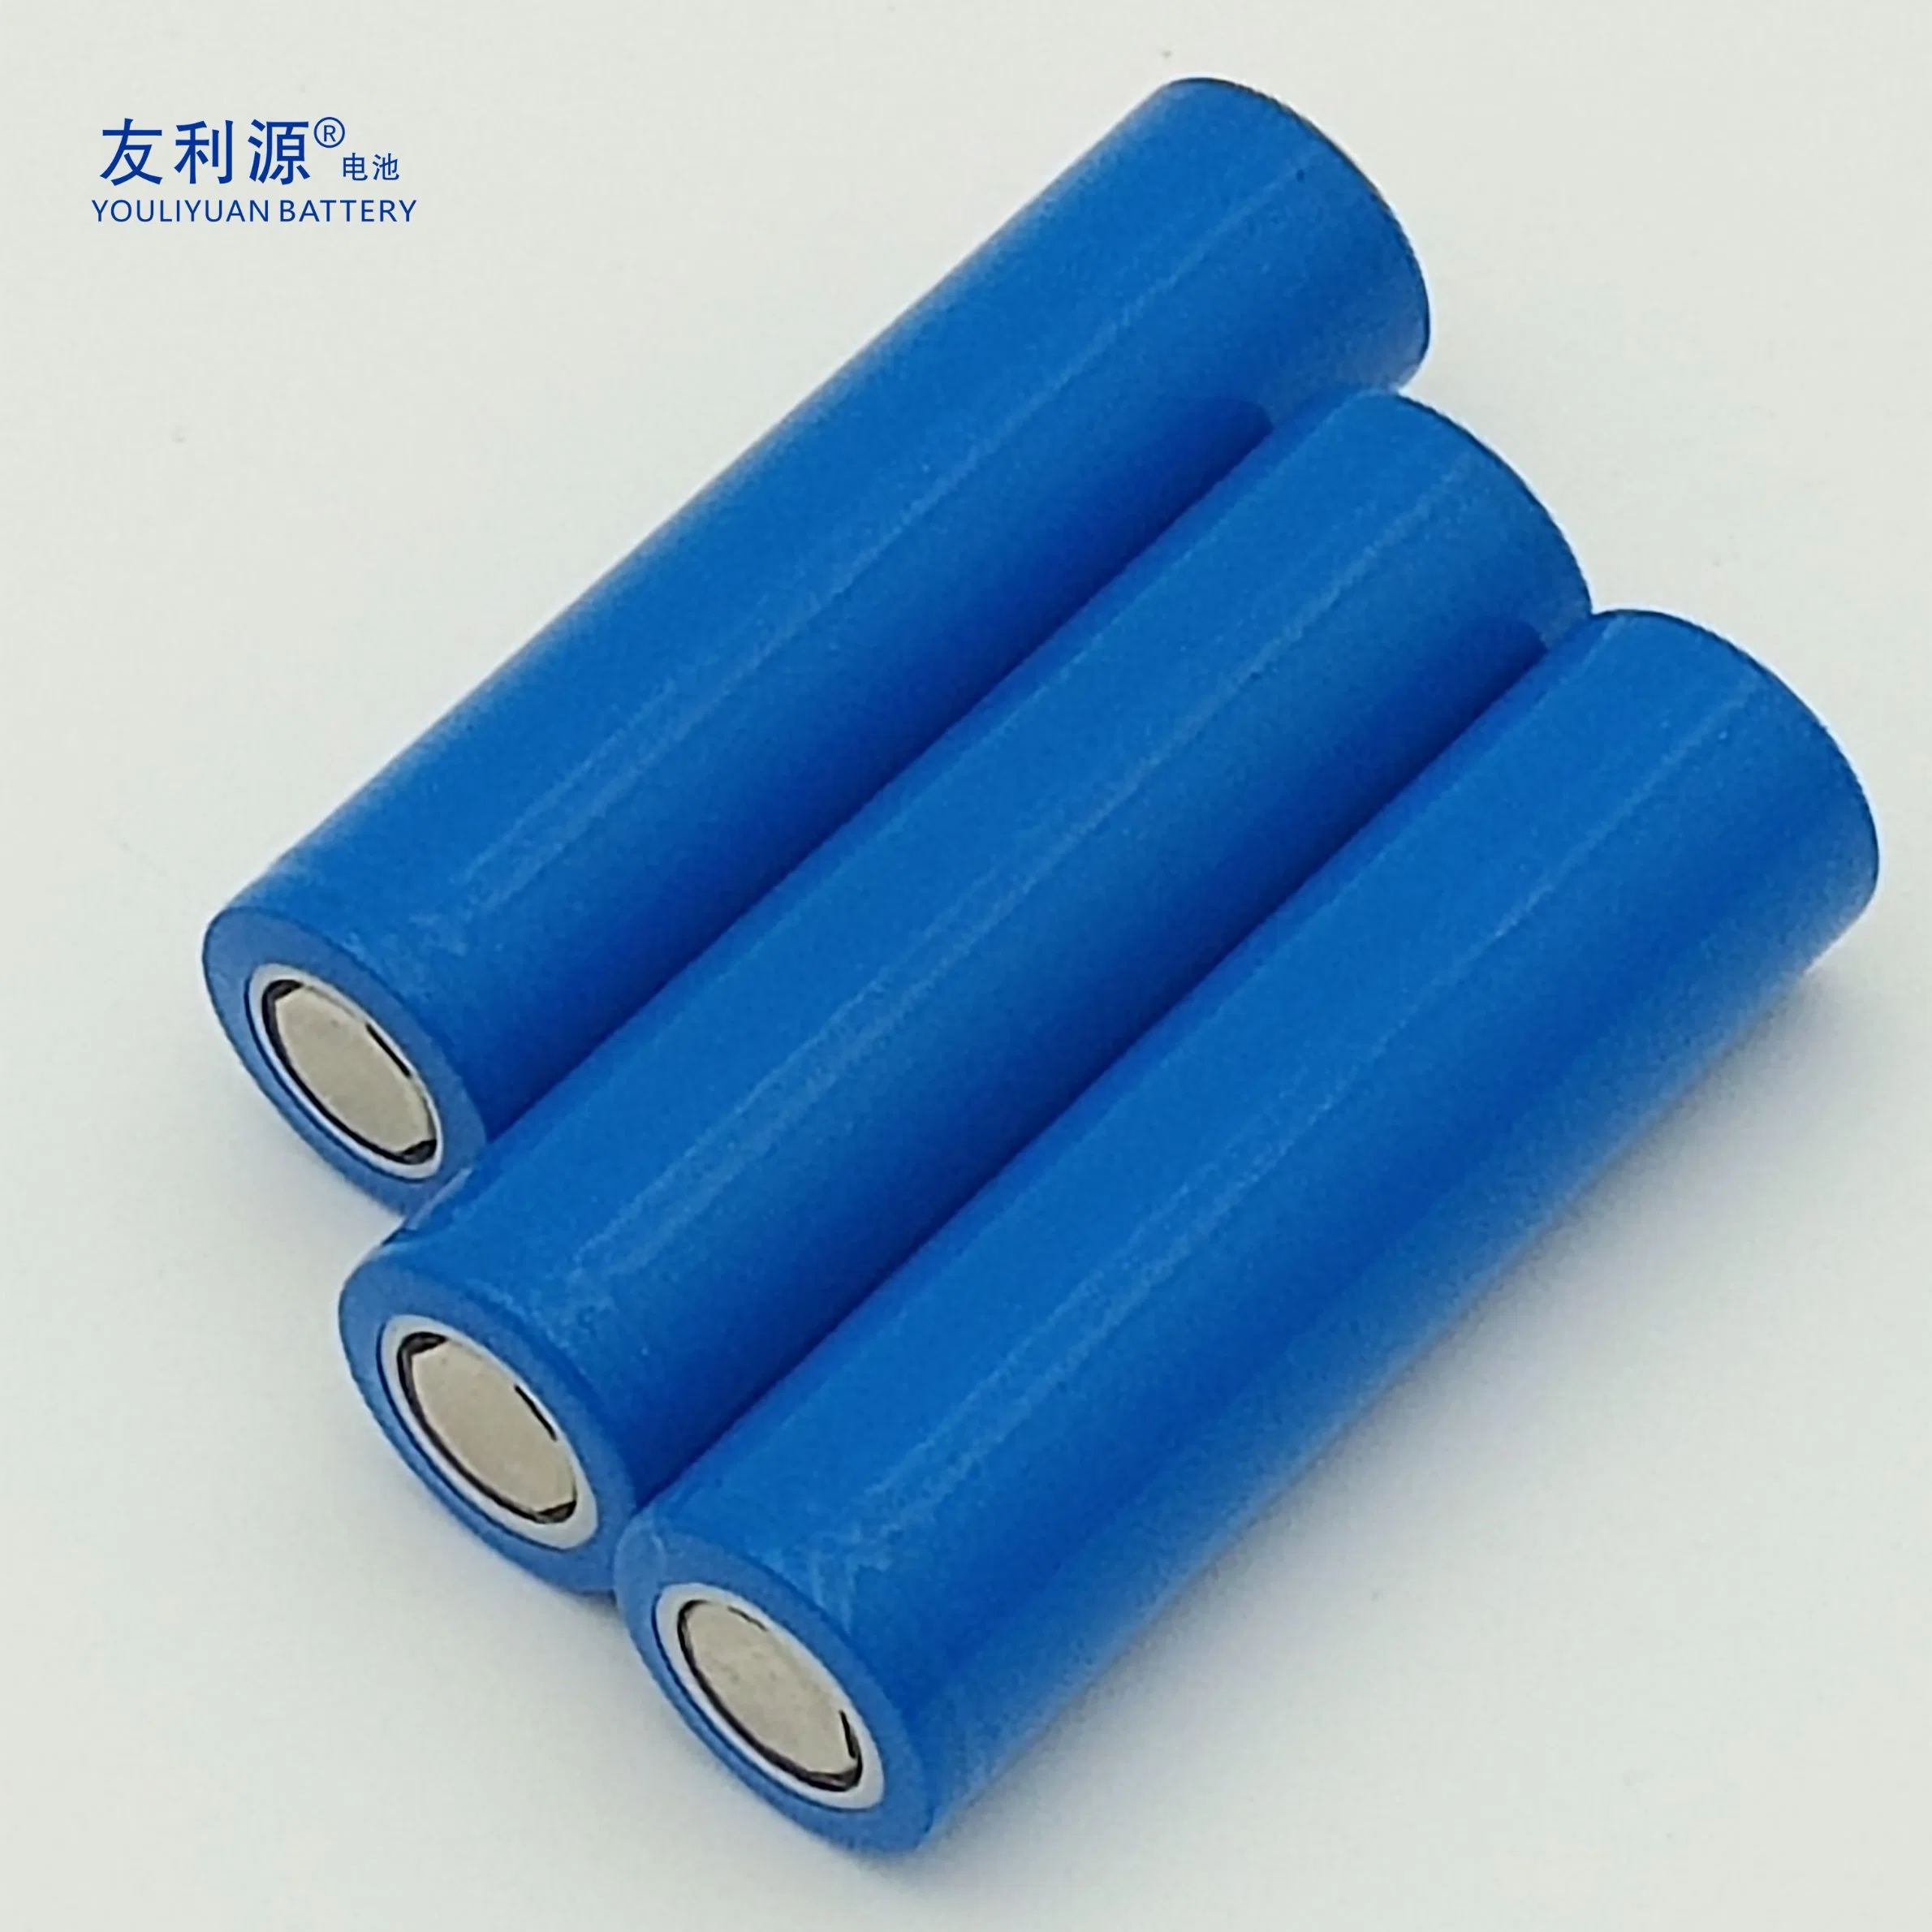 Factory Rechargeable 18650 Battery Cell 3.7V 1800mAh 6.66wh Lithium Battery with PCB and Cap for Massage Gun Battery